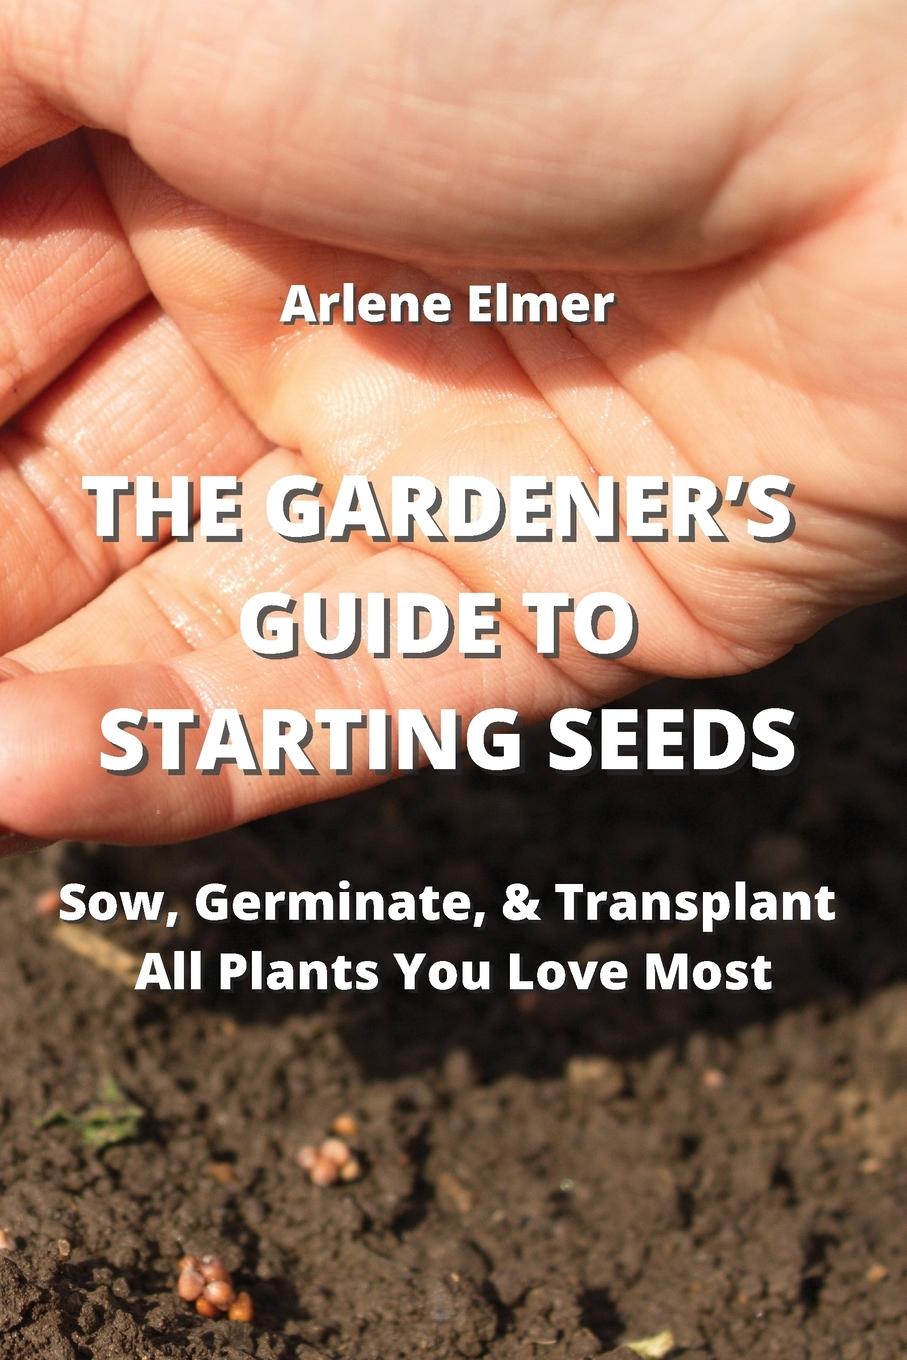 Book THE GARDENER'S GUIDE TO STARTING SEEDS 